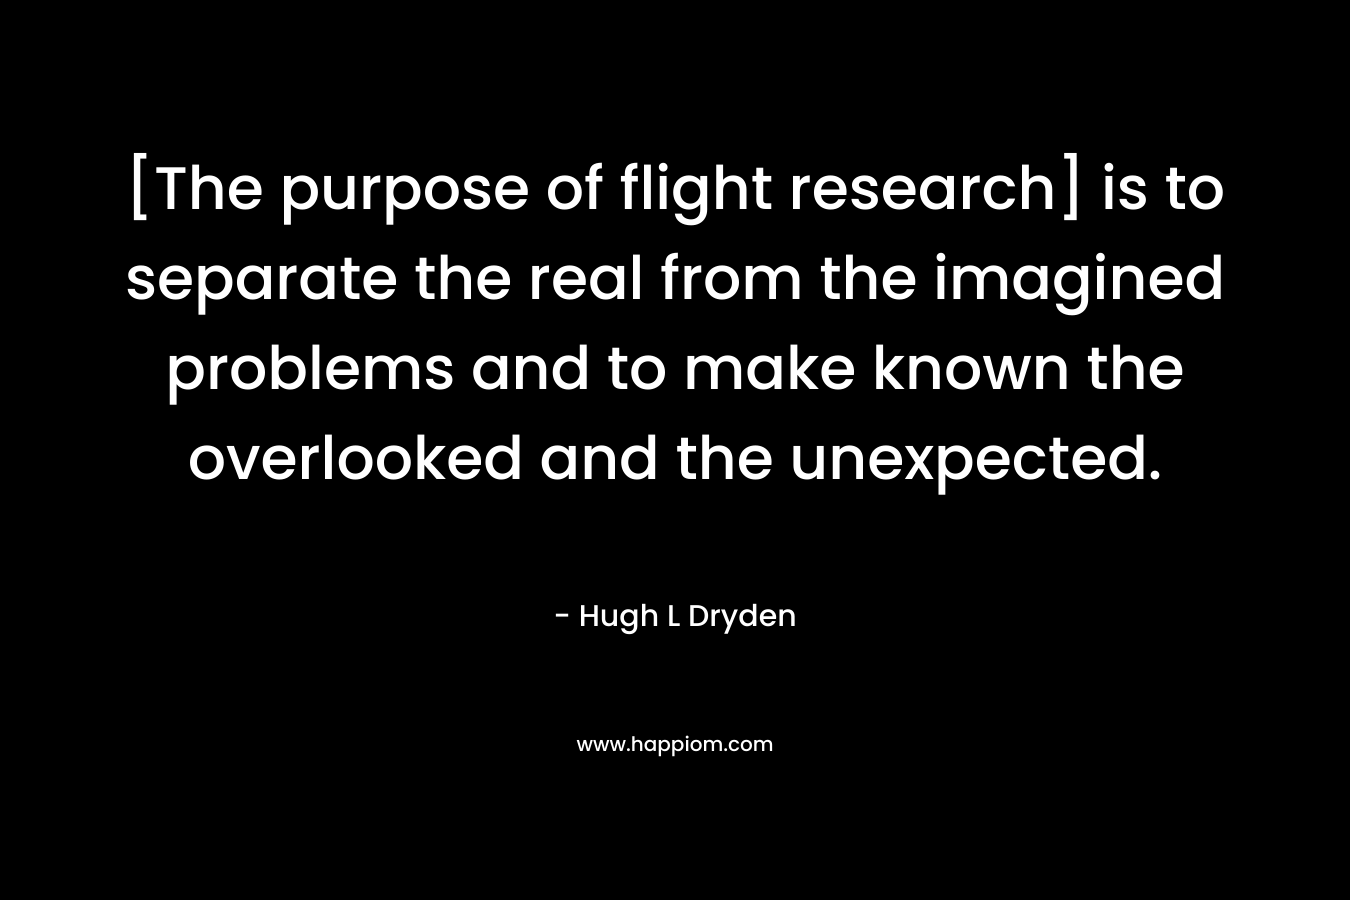 [The purpose of flight research] is to separate the real from the imagined problems and to make known the overlooked and the unexpected. – Hugh L Dryden